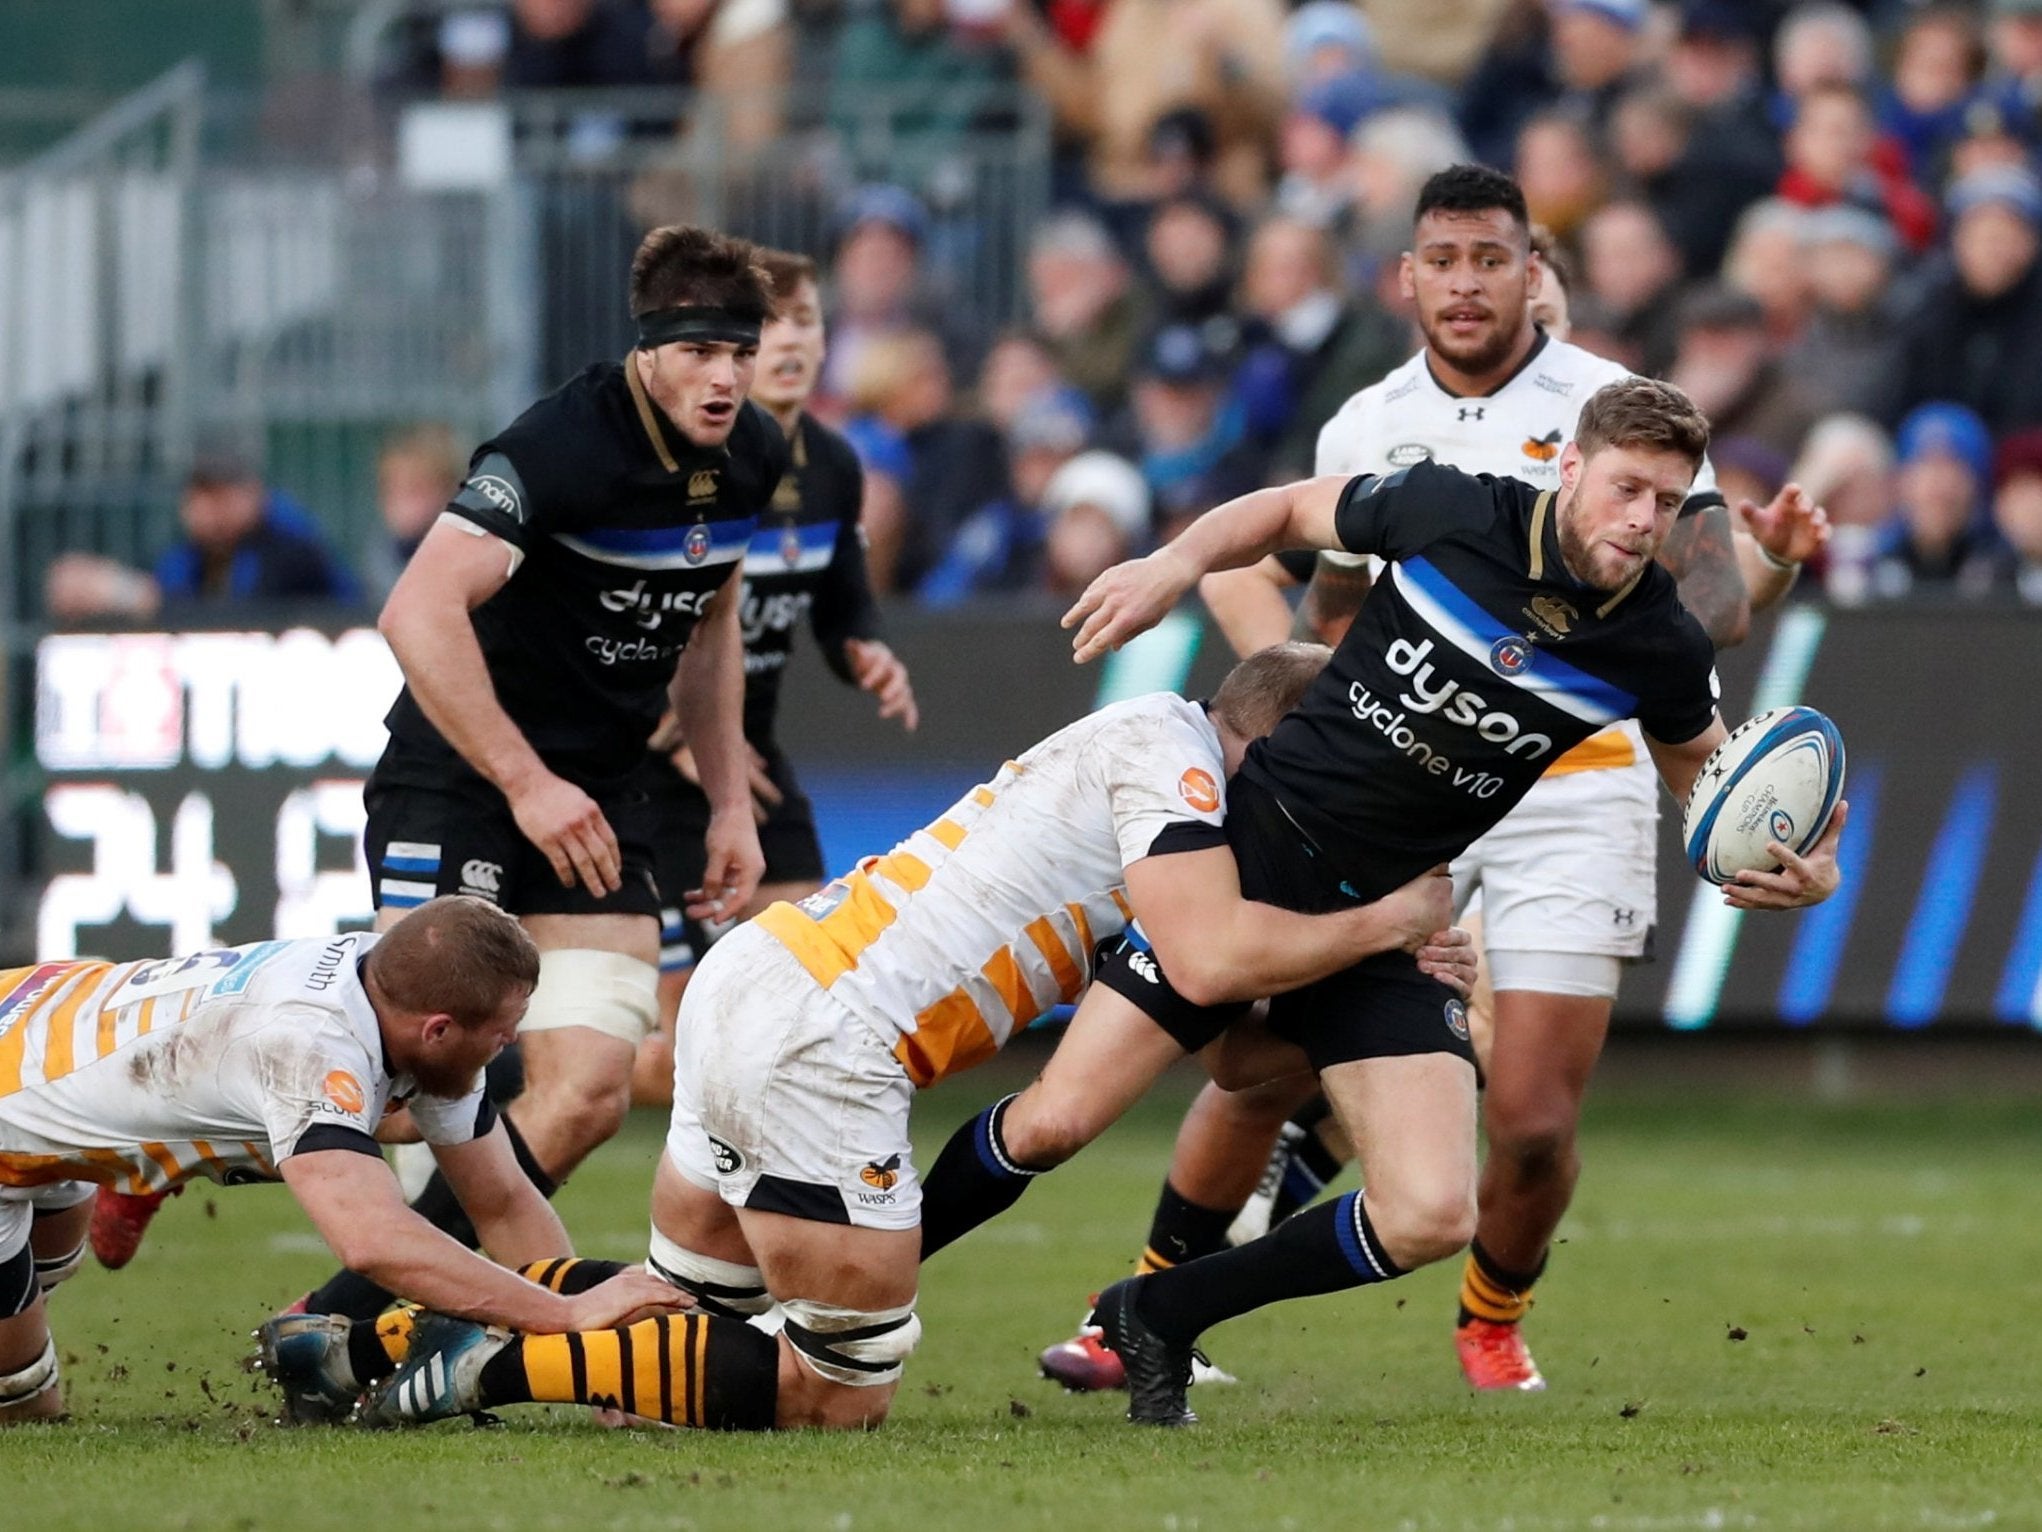 Rhys Priestland kicked the match-winning penalty for Bath in the 79th minute